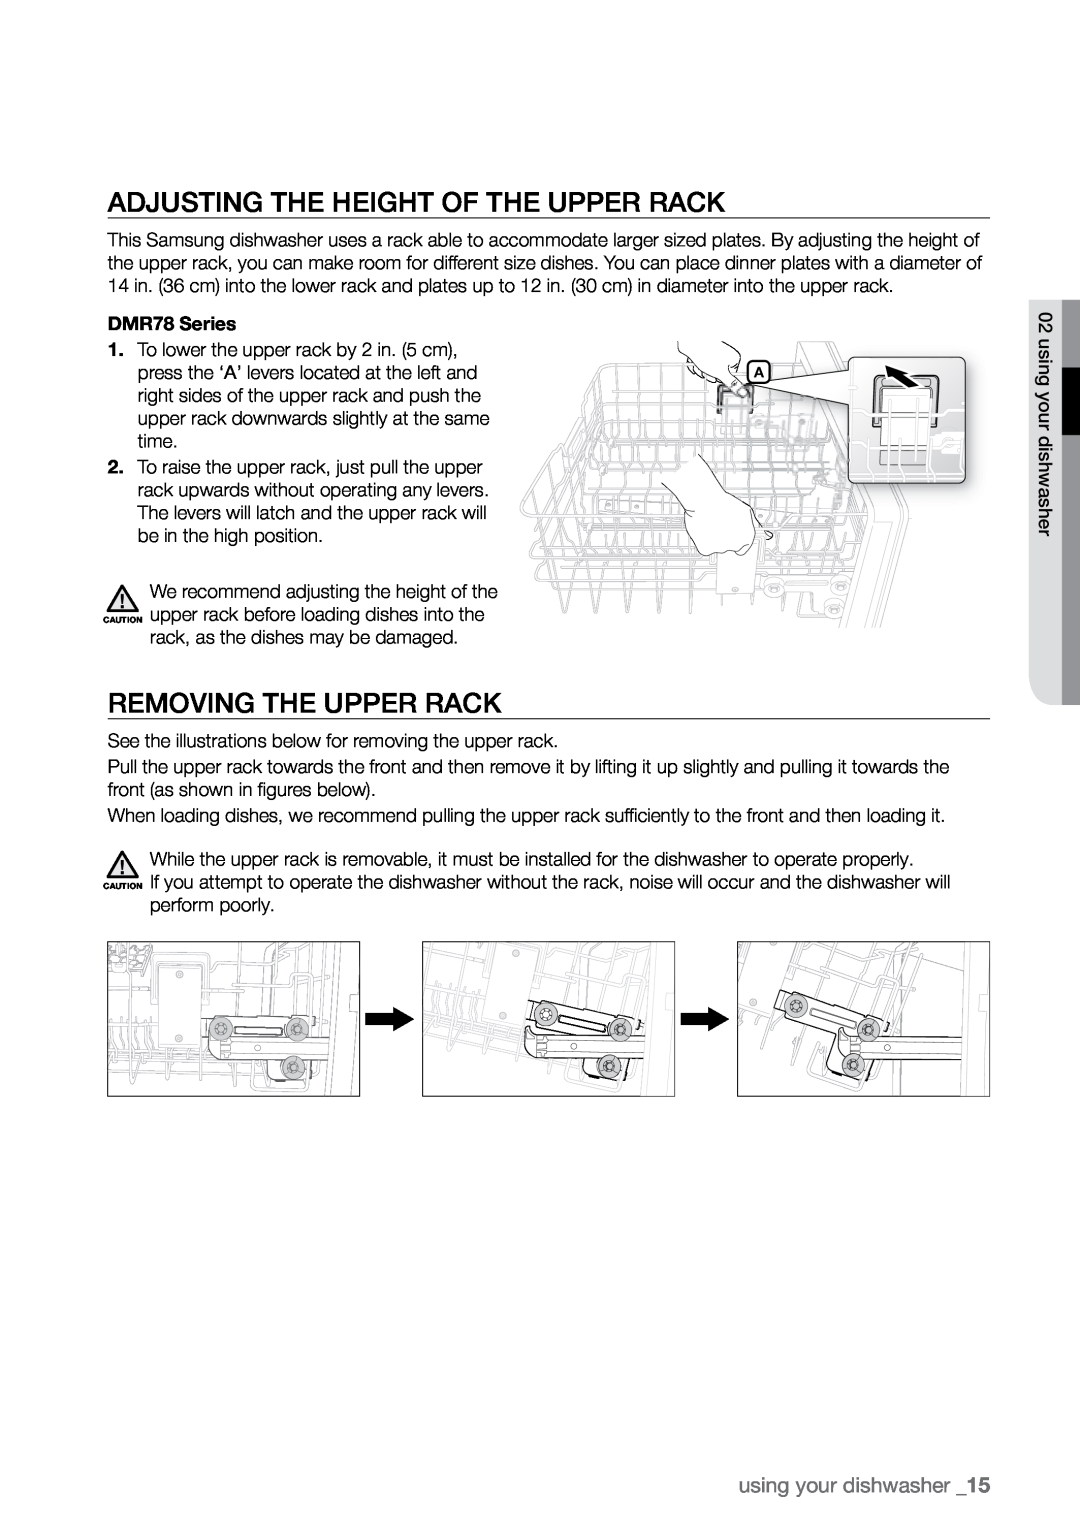 Samsung manual Adjusting the height of the upper rack, Removing the upper rack, using your dishwasher, DMR78 Series 